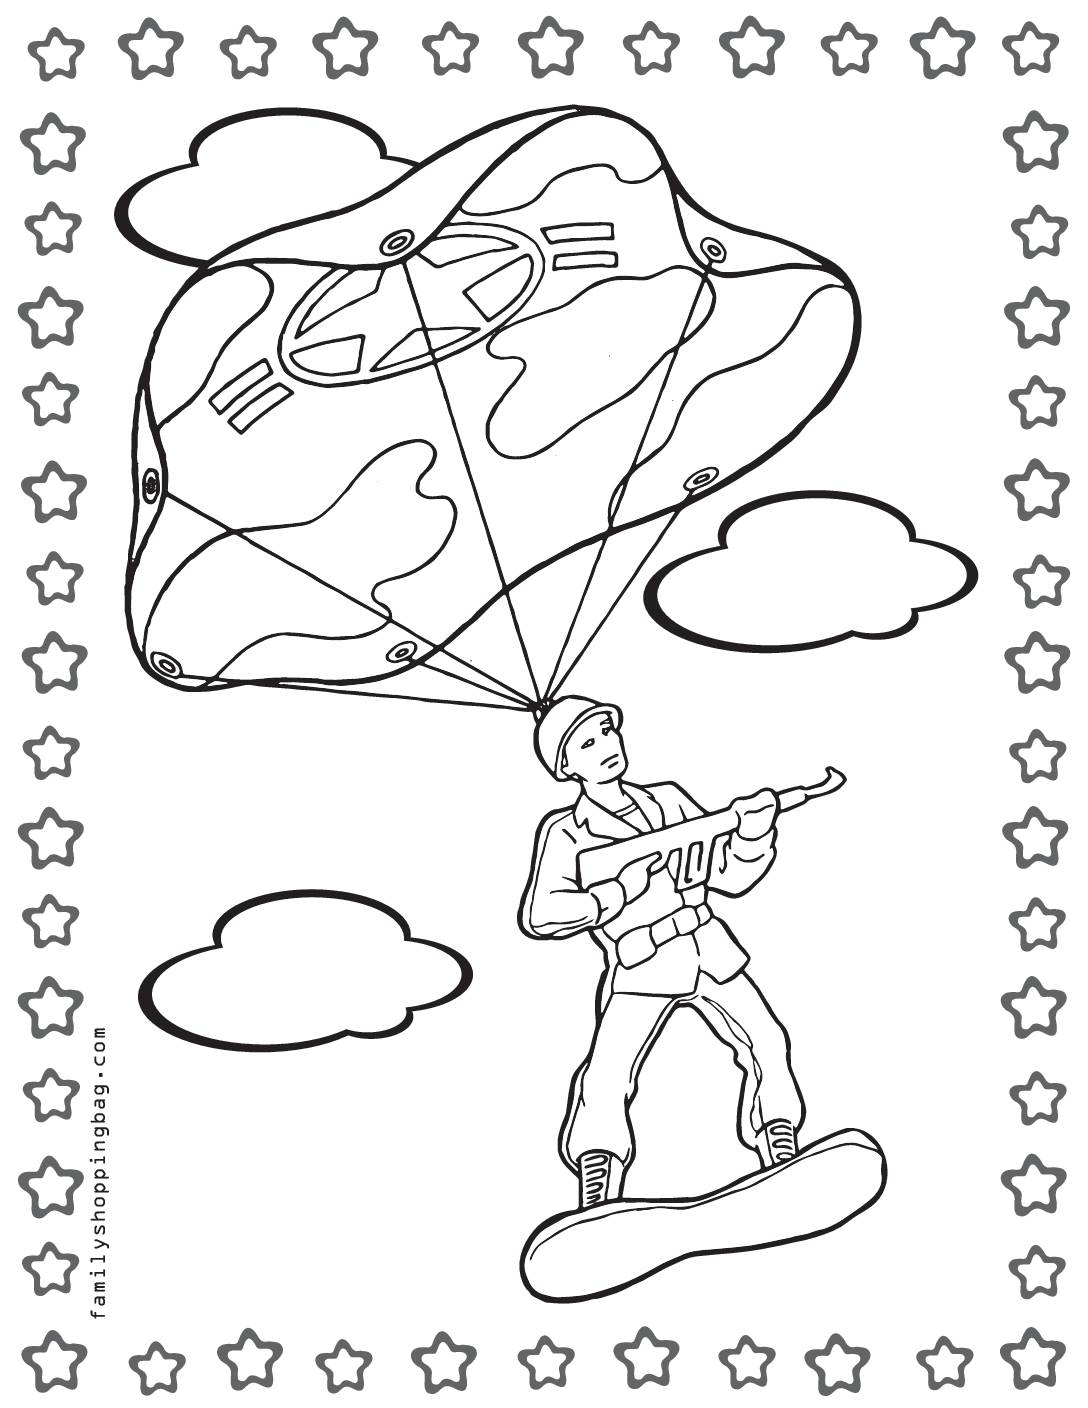 Coloring Page 20 army